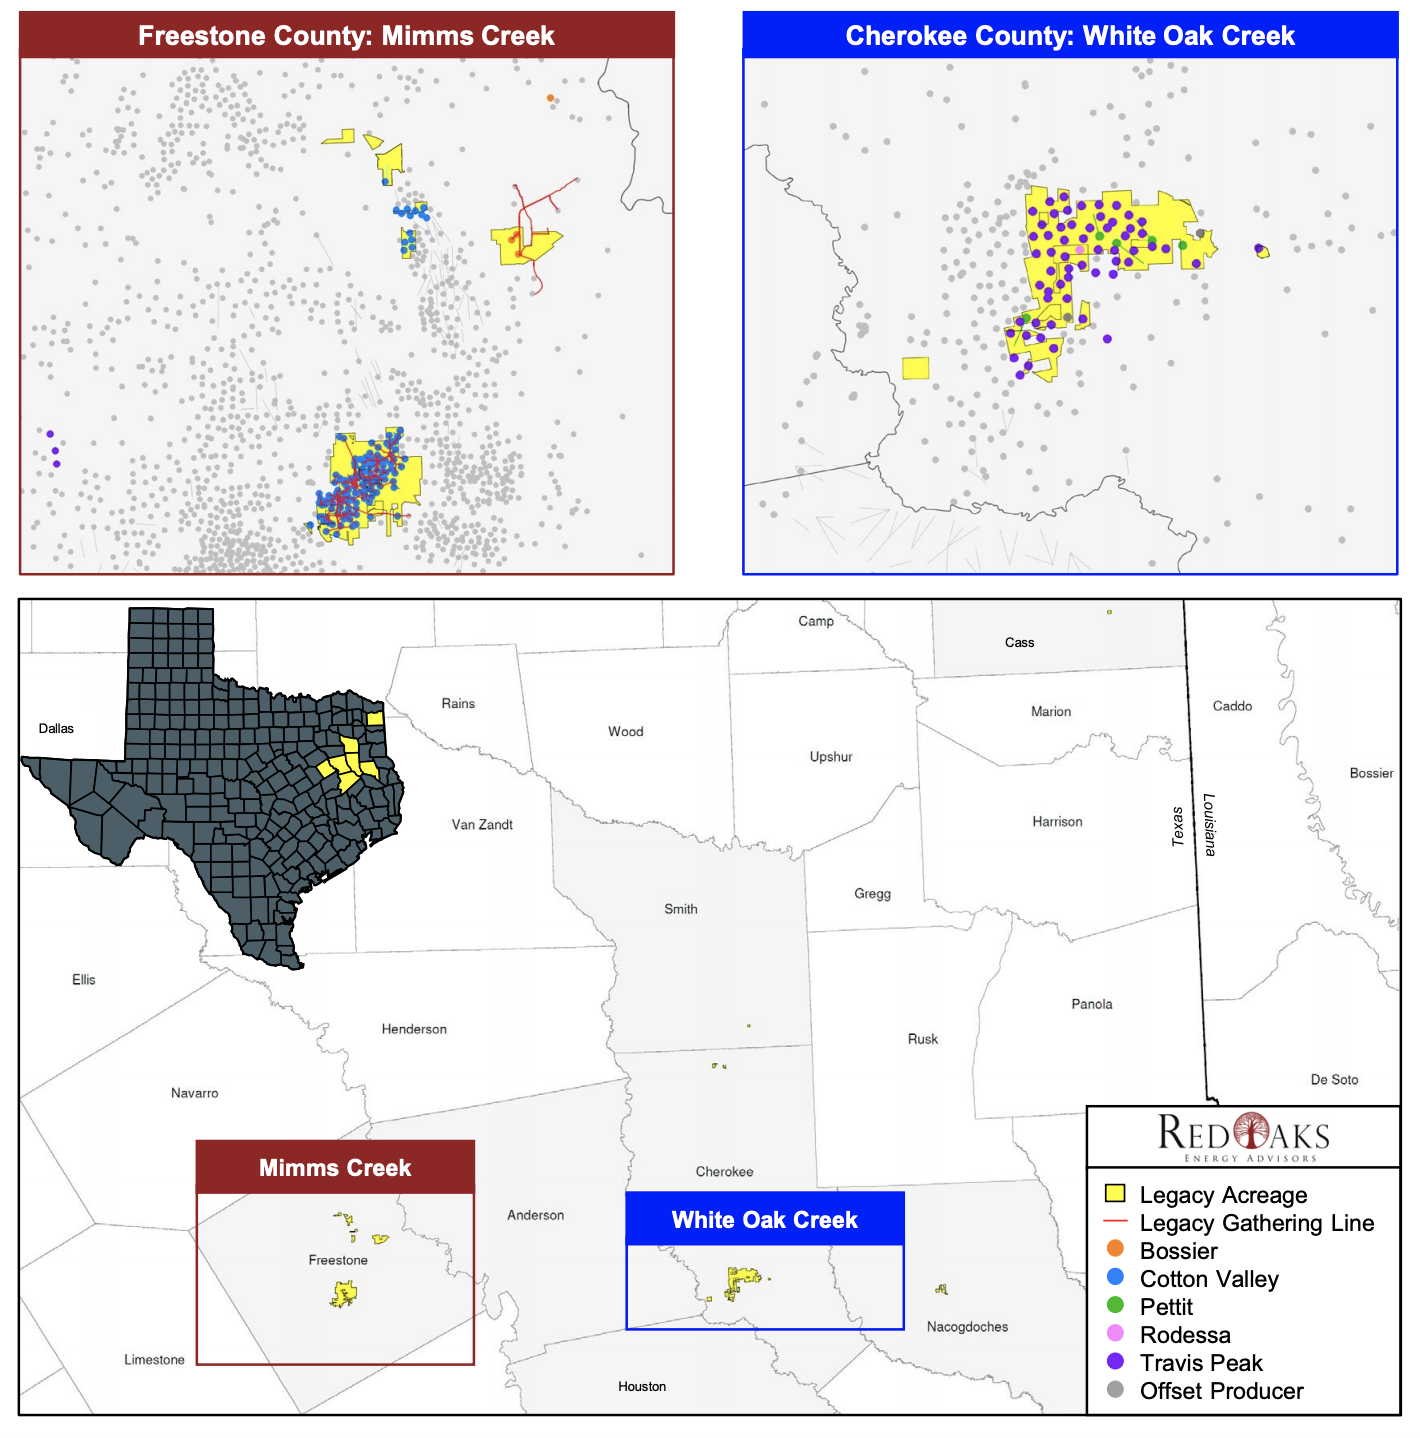 Marketed: Legacy Reserves East Texas Operated, Nonop Properties